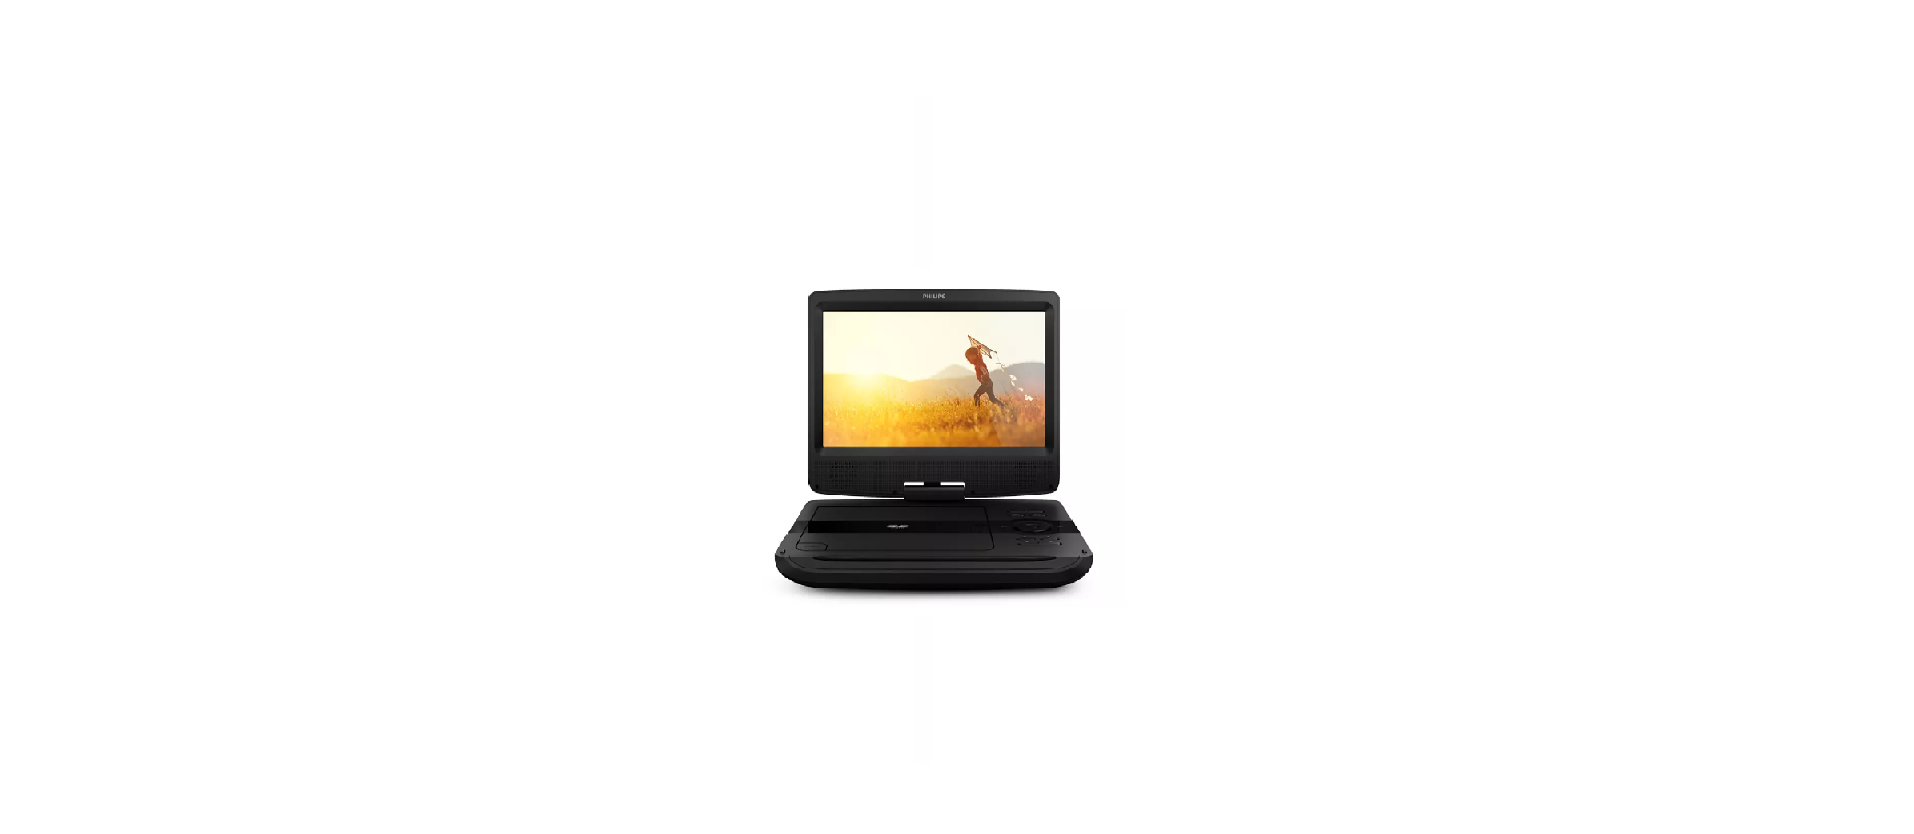 Philips-TAP3705-Portable-DVD-Player-3000-Series-FEATURE